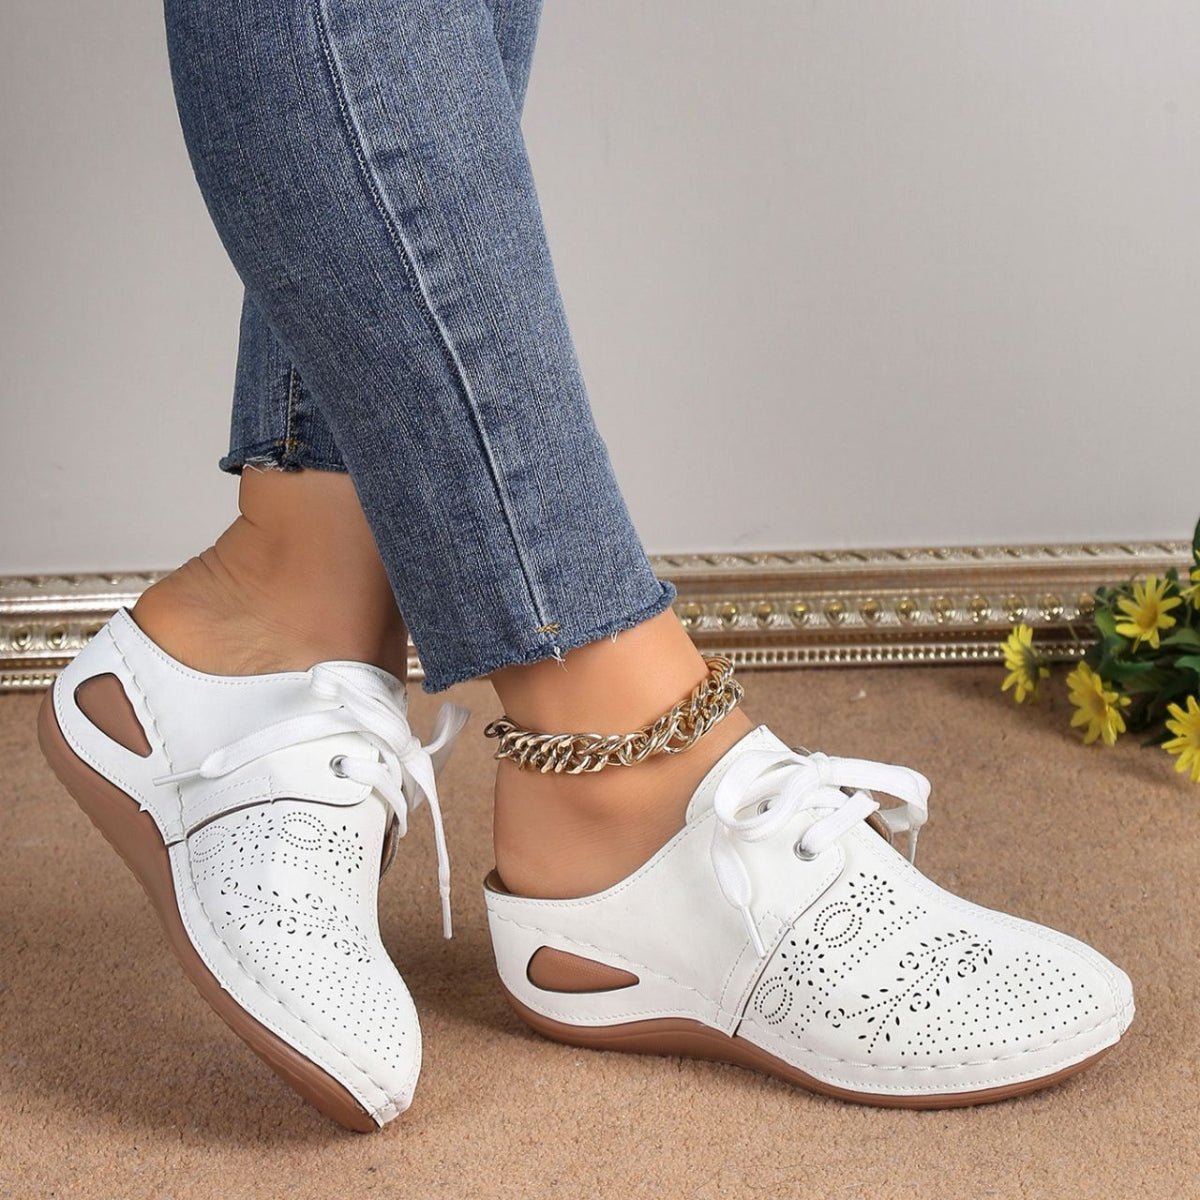 Lace - Up Round Toe Wedge Sandals - OMG! Rose